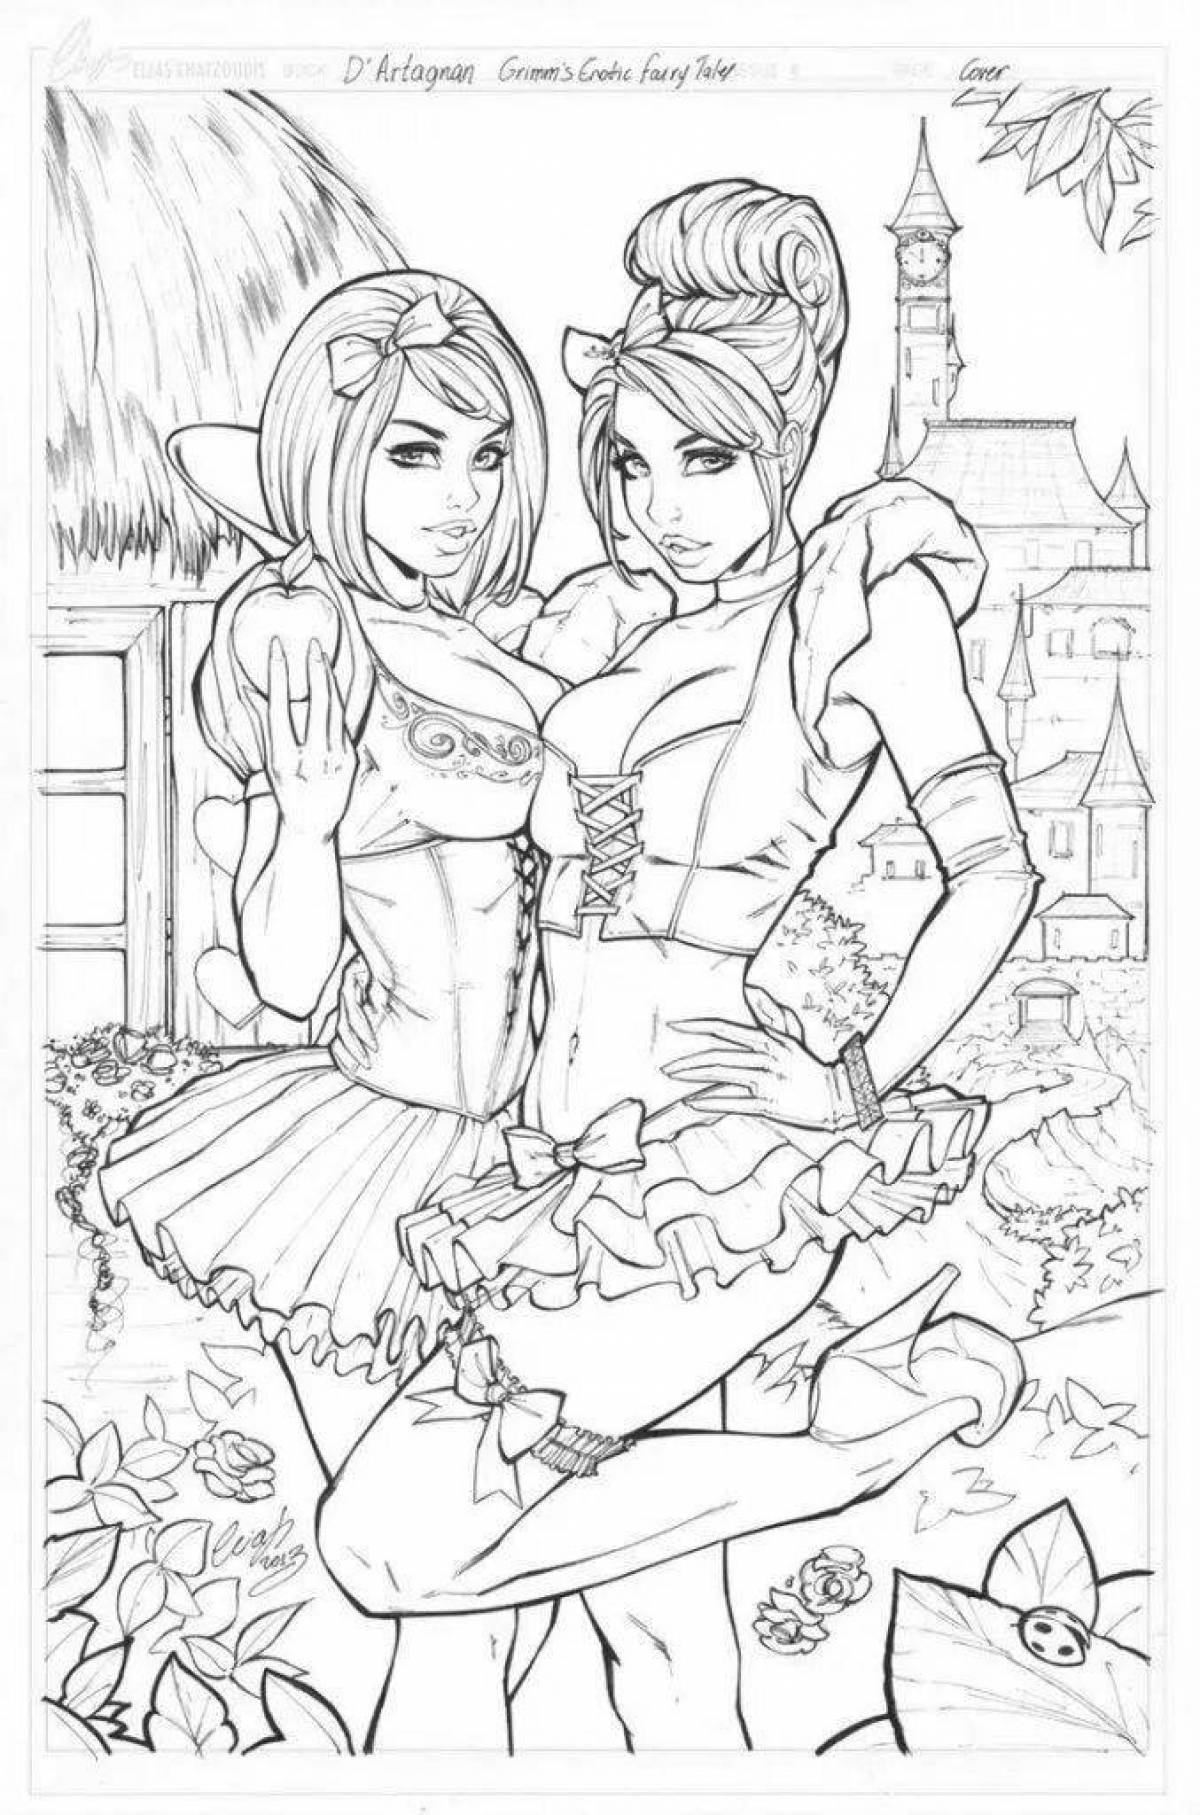 Charming sex coloring book